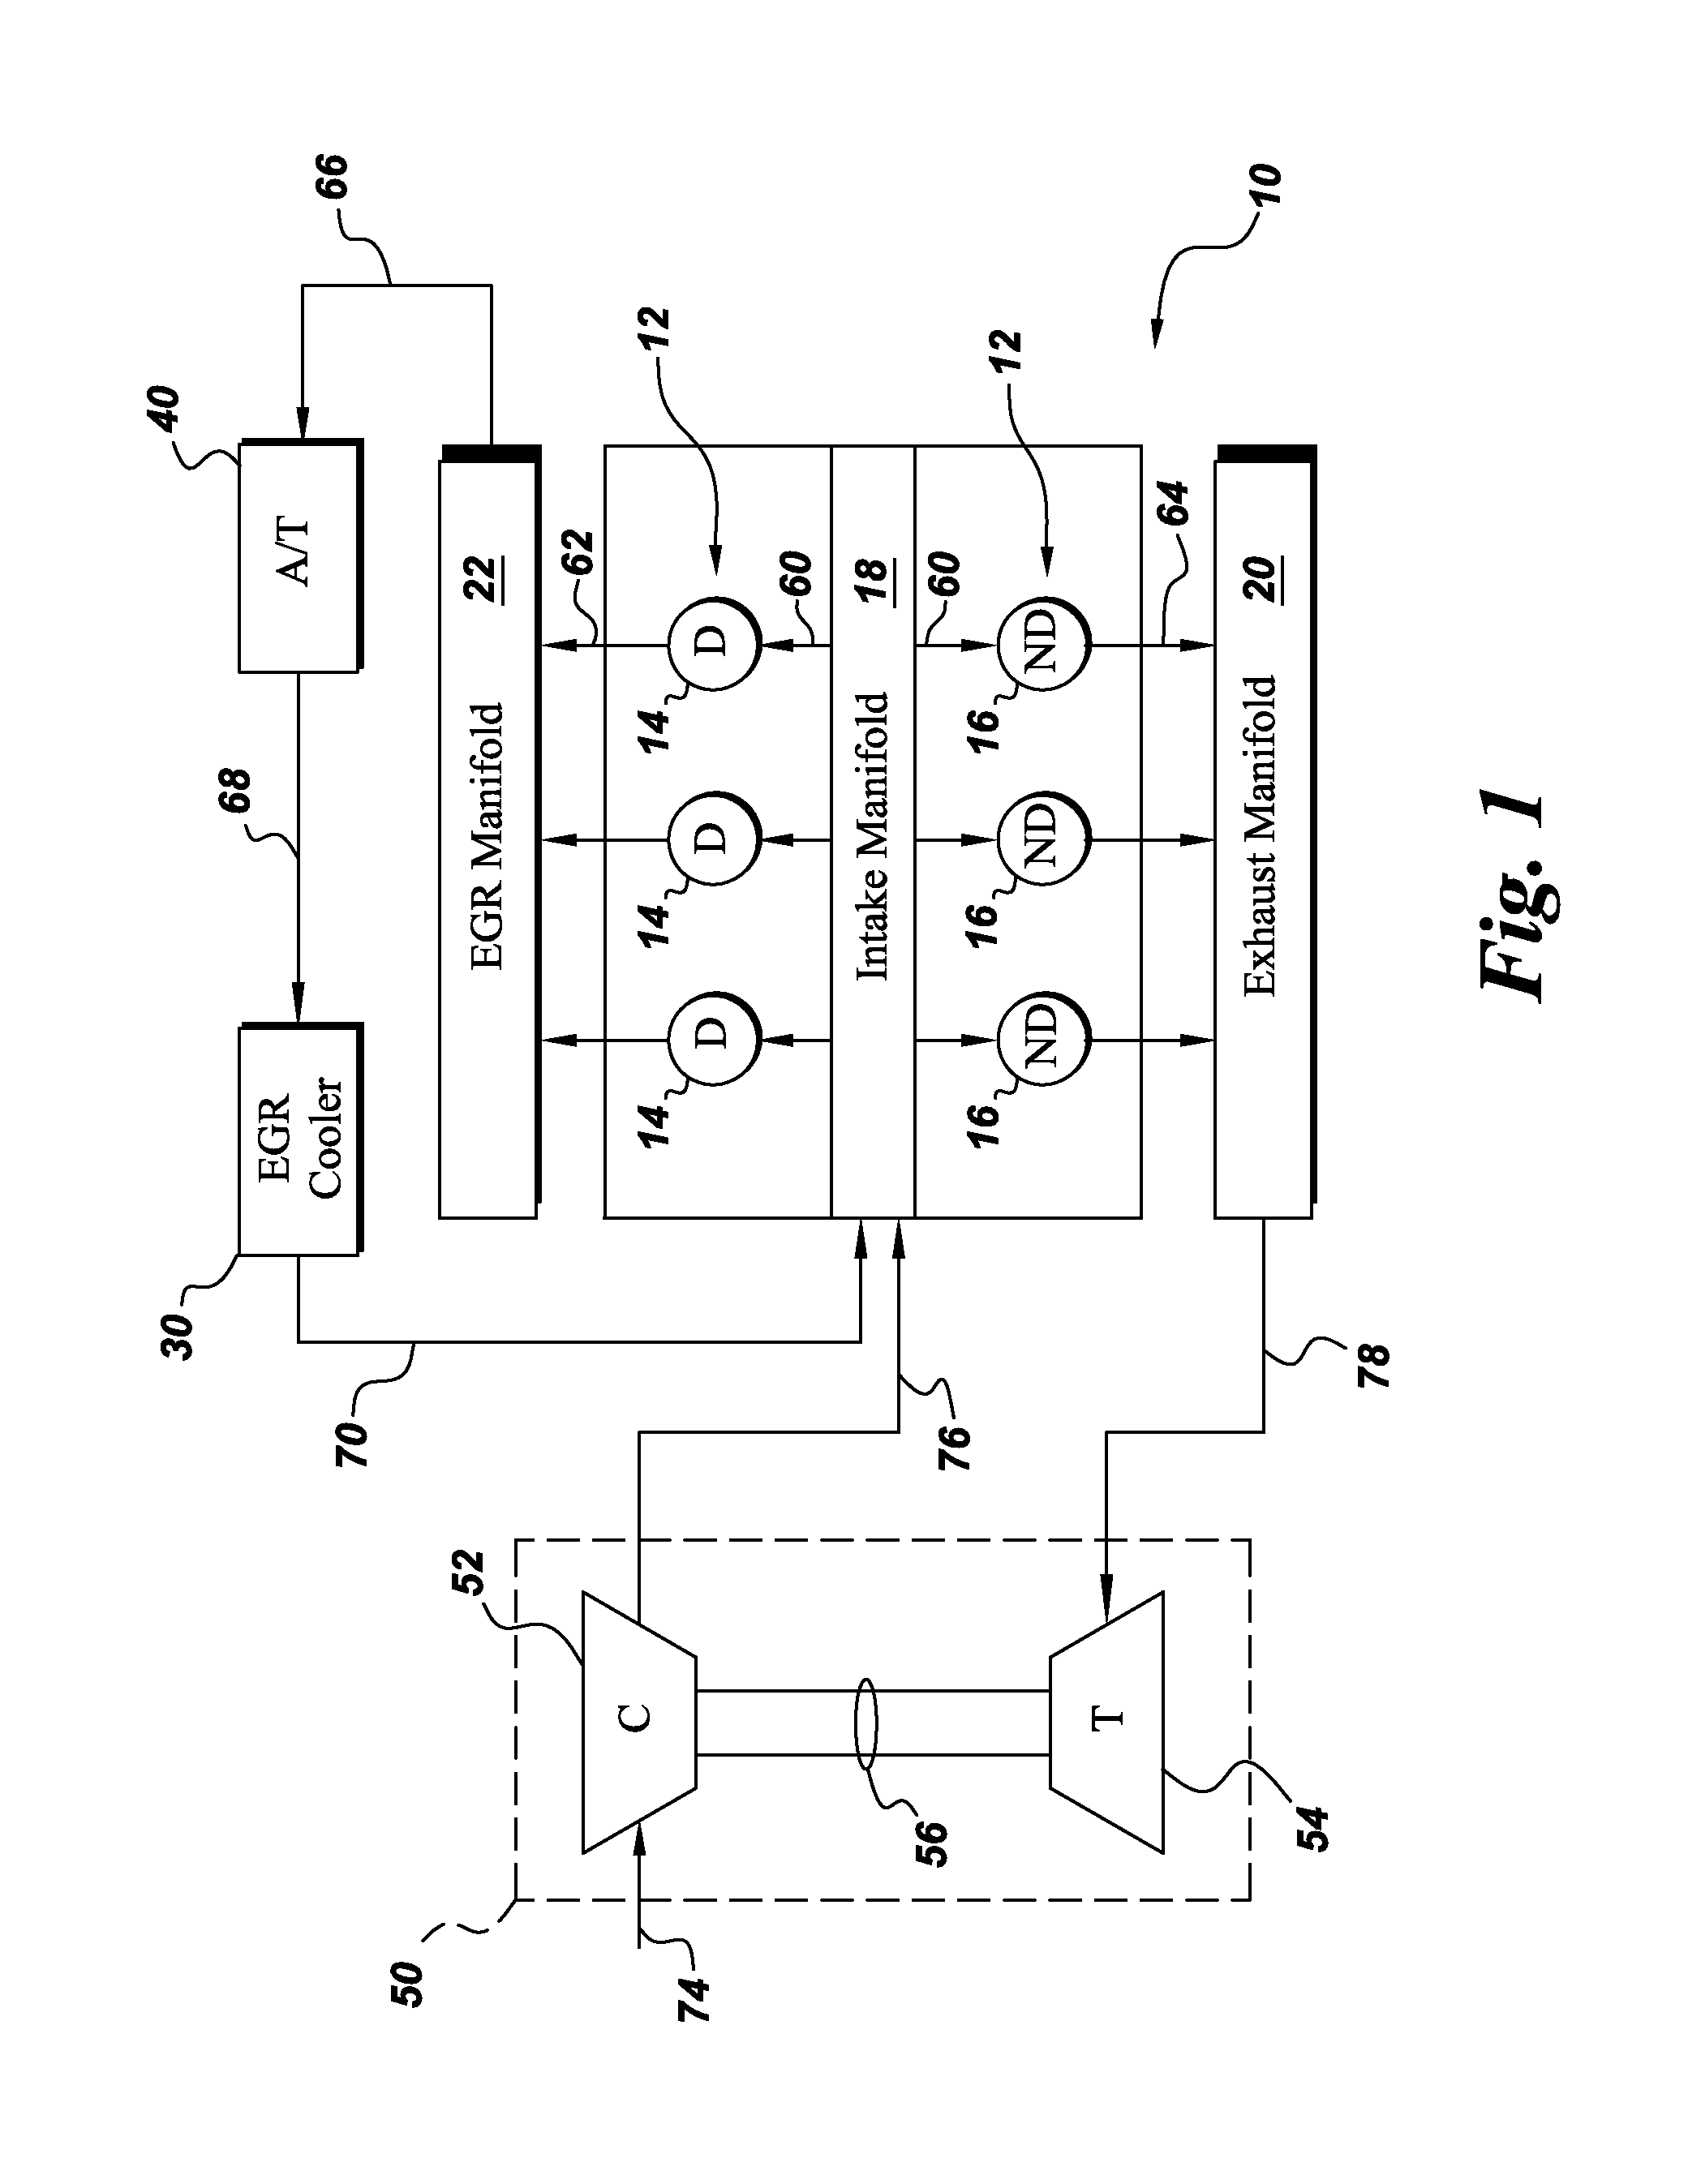 Exhaust gas recirculation in a reciprocating engine with continuously regenerating particulate trap